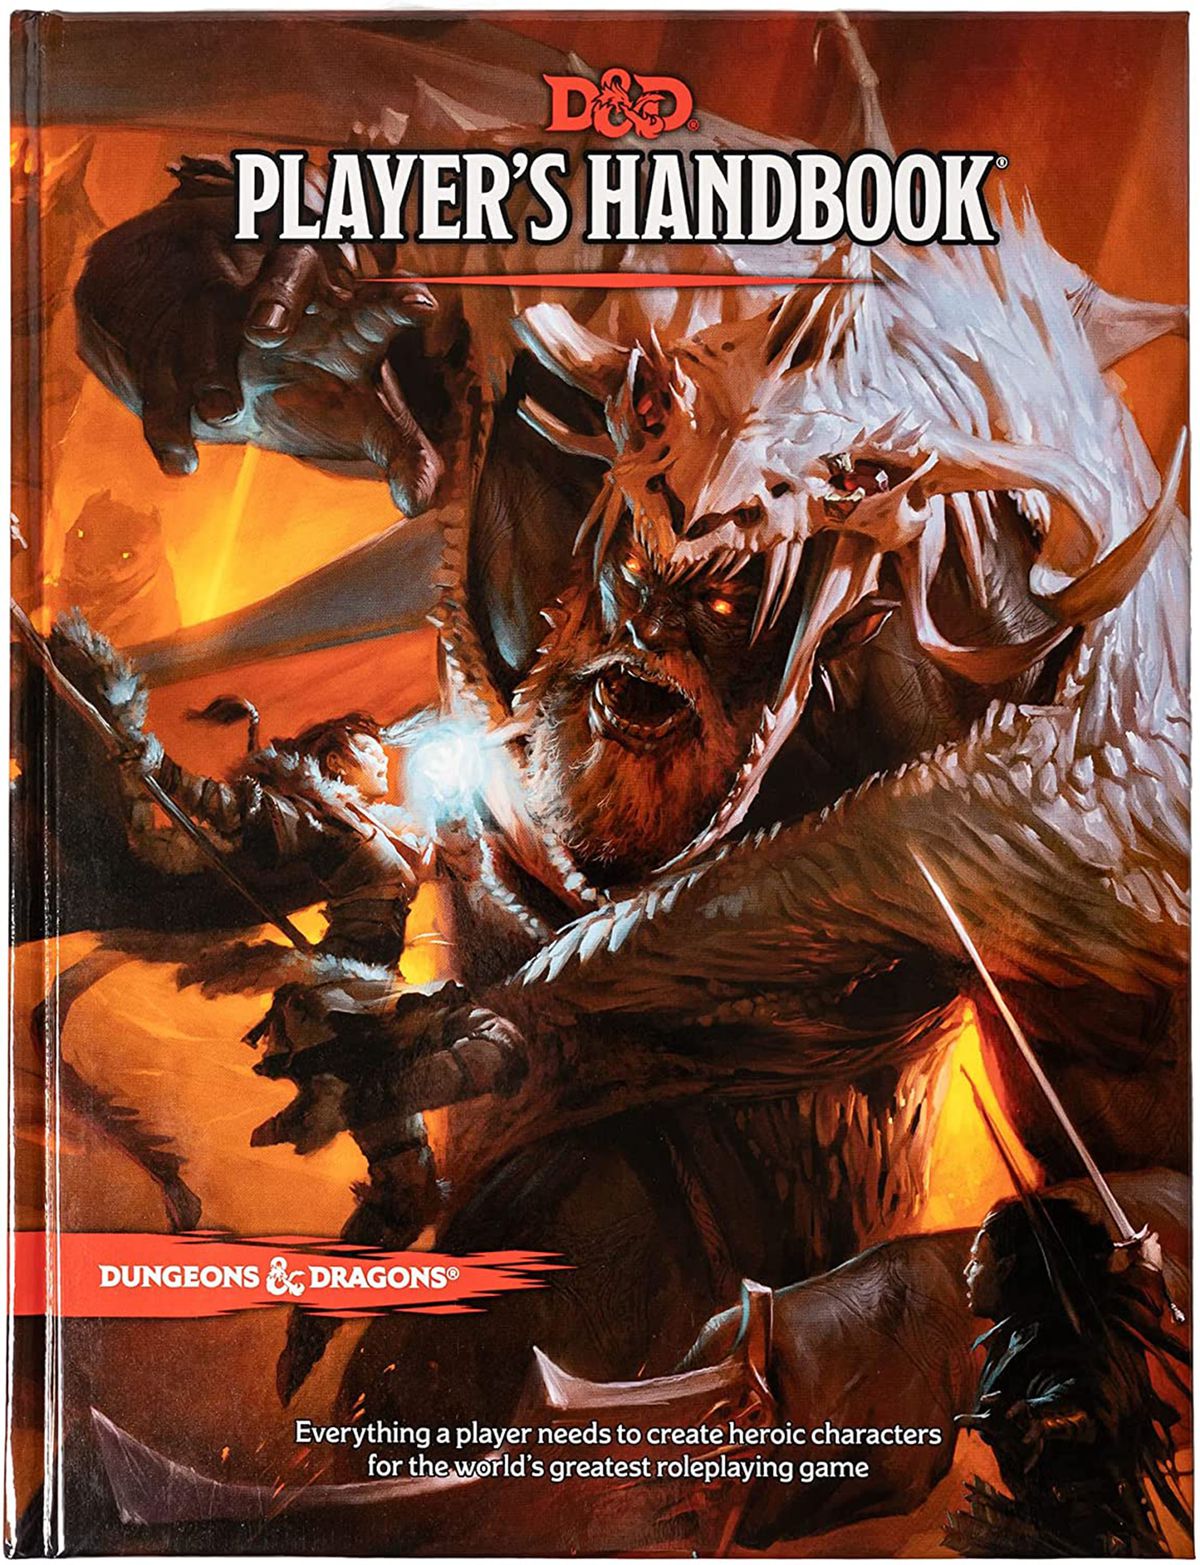 A warrior dressed in fur legging and carryuing a magic staff leaps toward a giant wearing a massive skull for a helmet. This is the cover of the Player’s handbook, first published in 2014